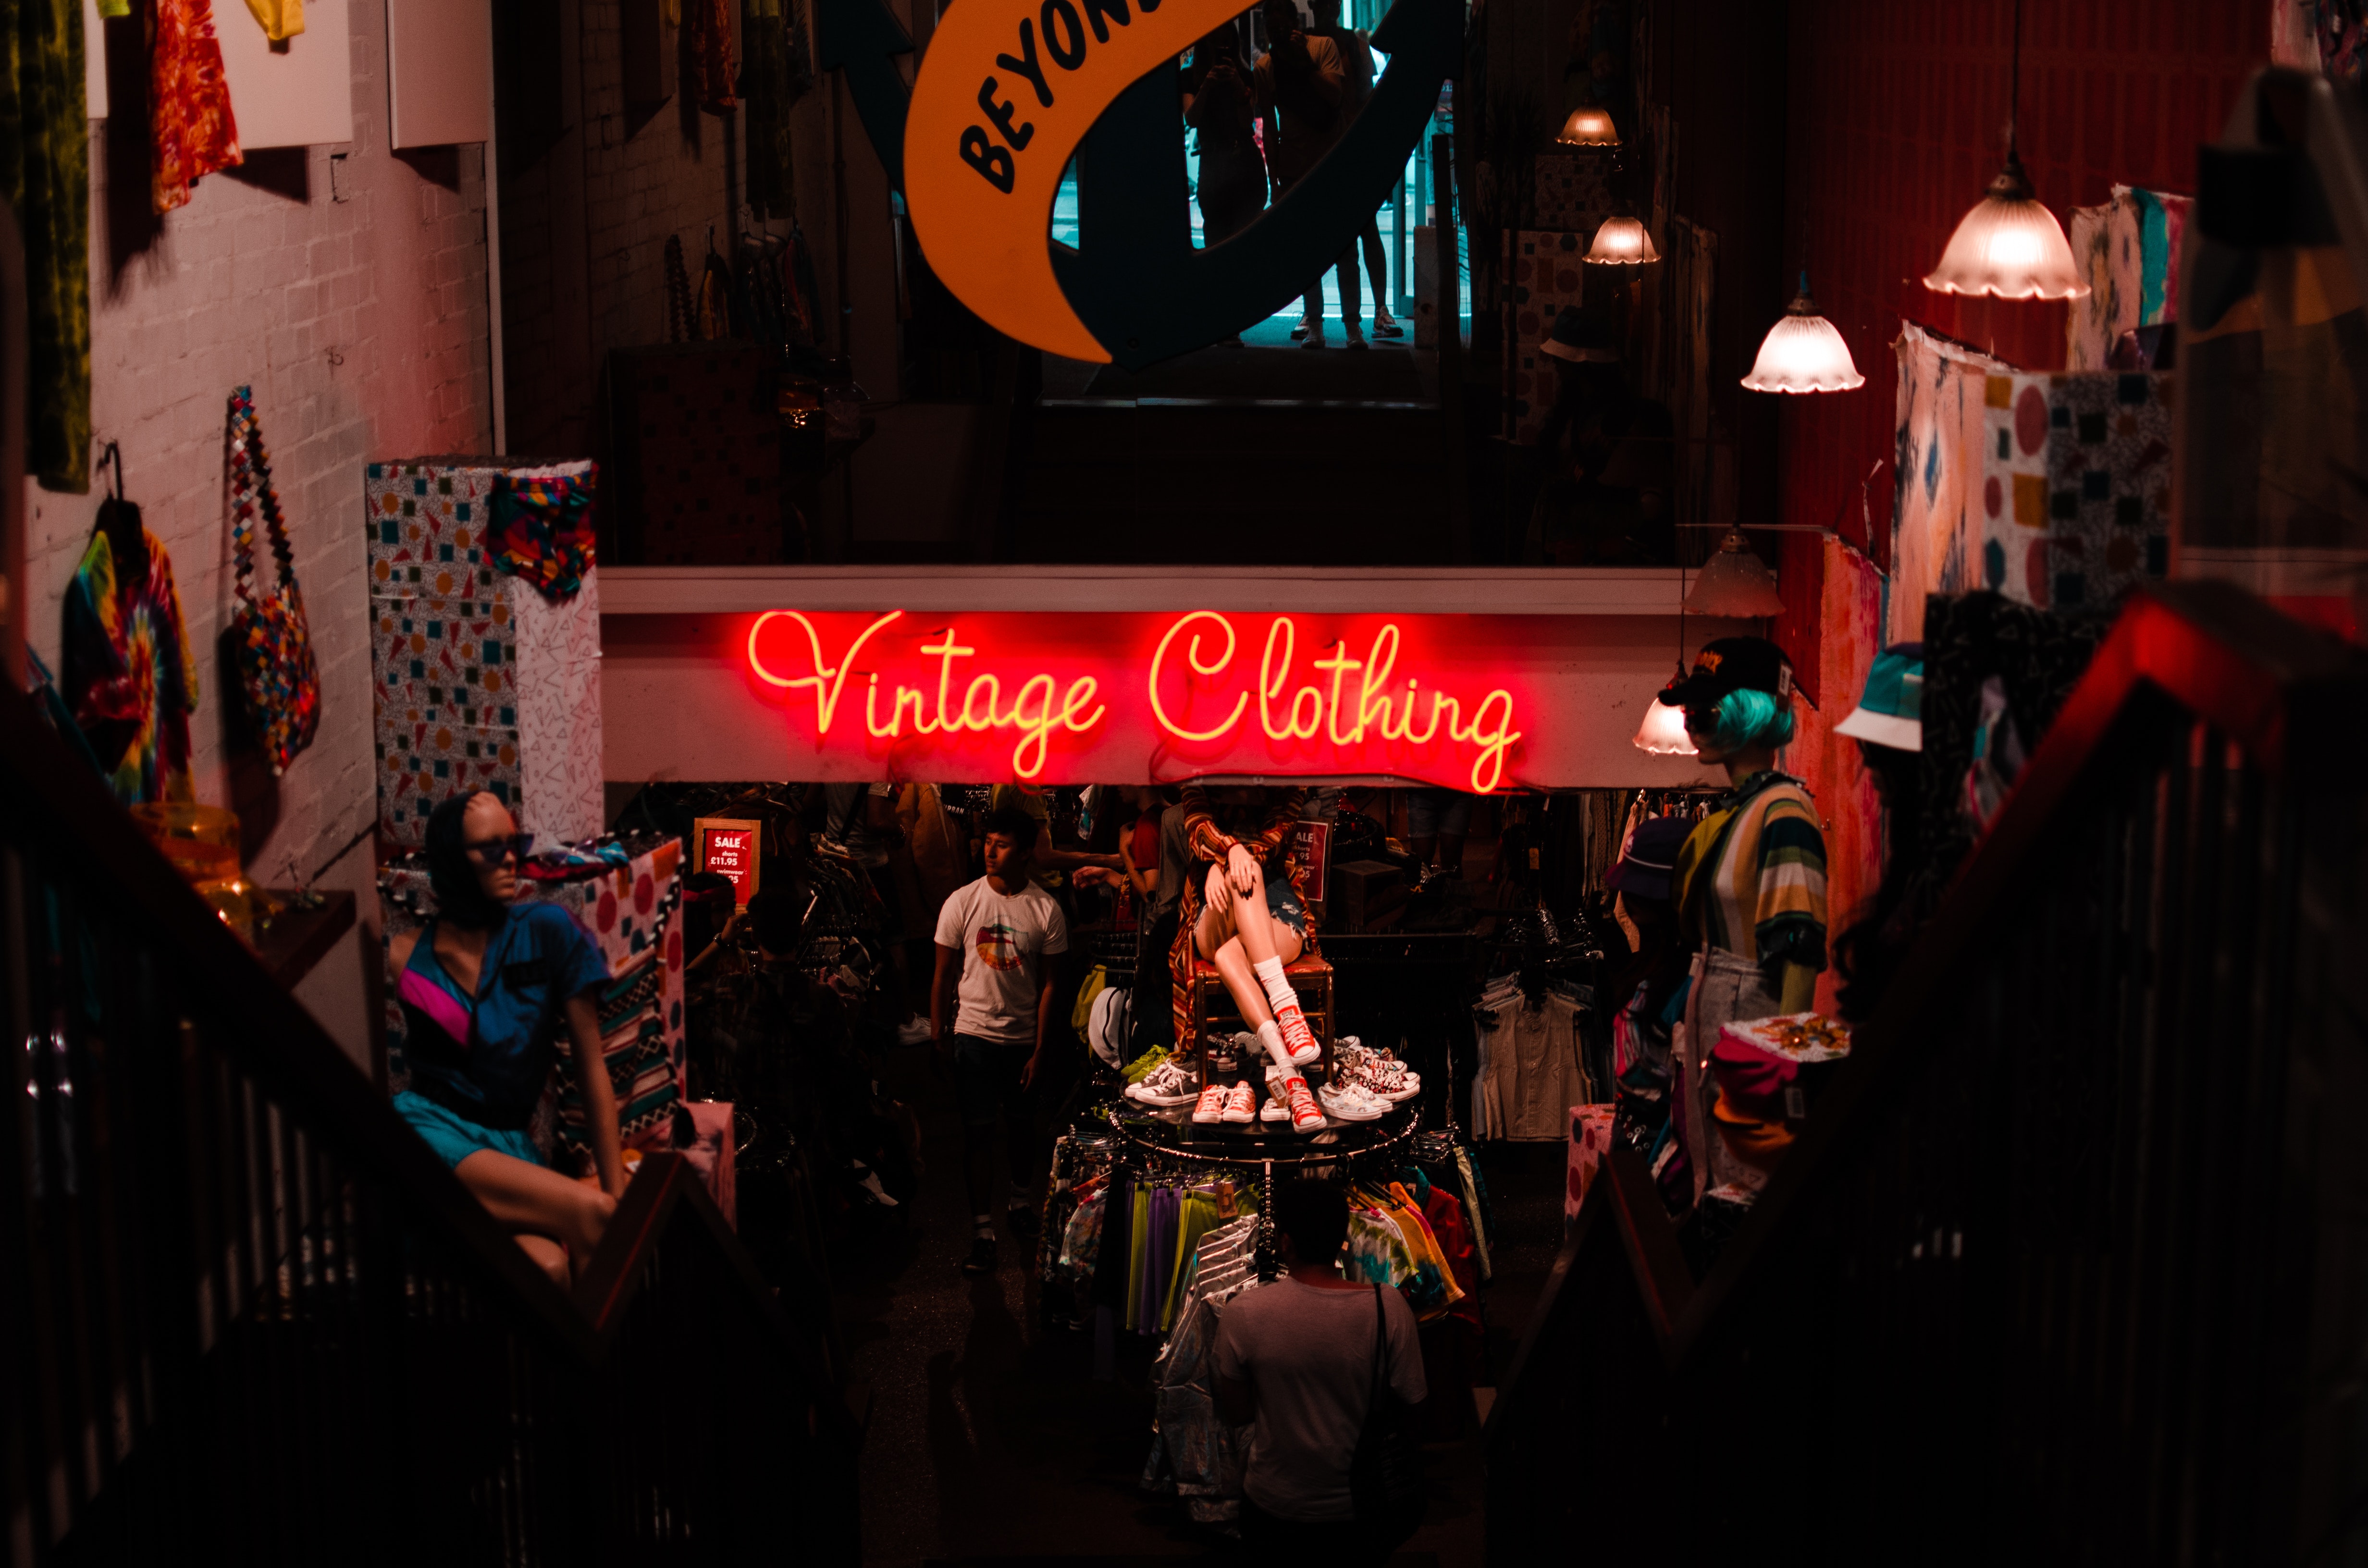 Photo by Kei Scampa: https://www.pexels.com/photo/neon-sign-in-shop-with-vintage-clothes-2964779/